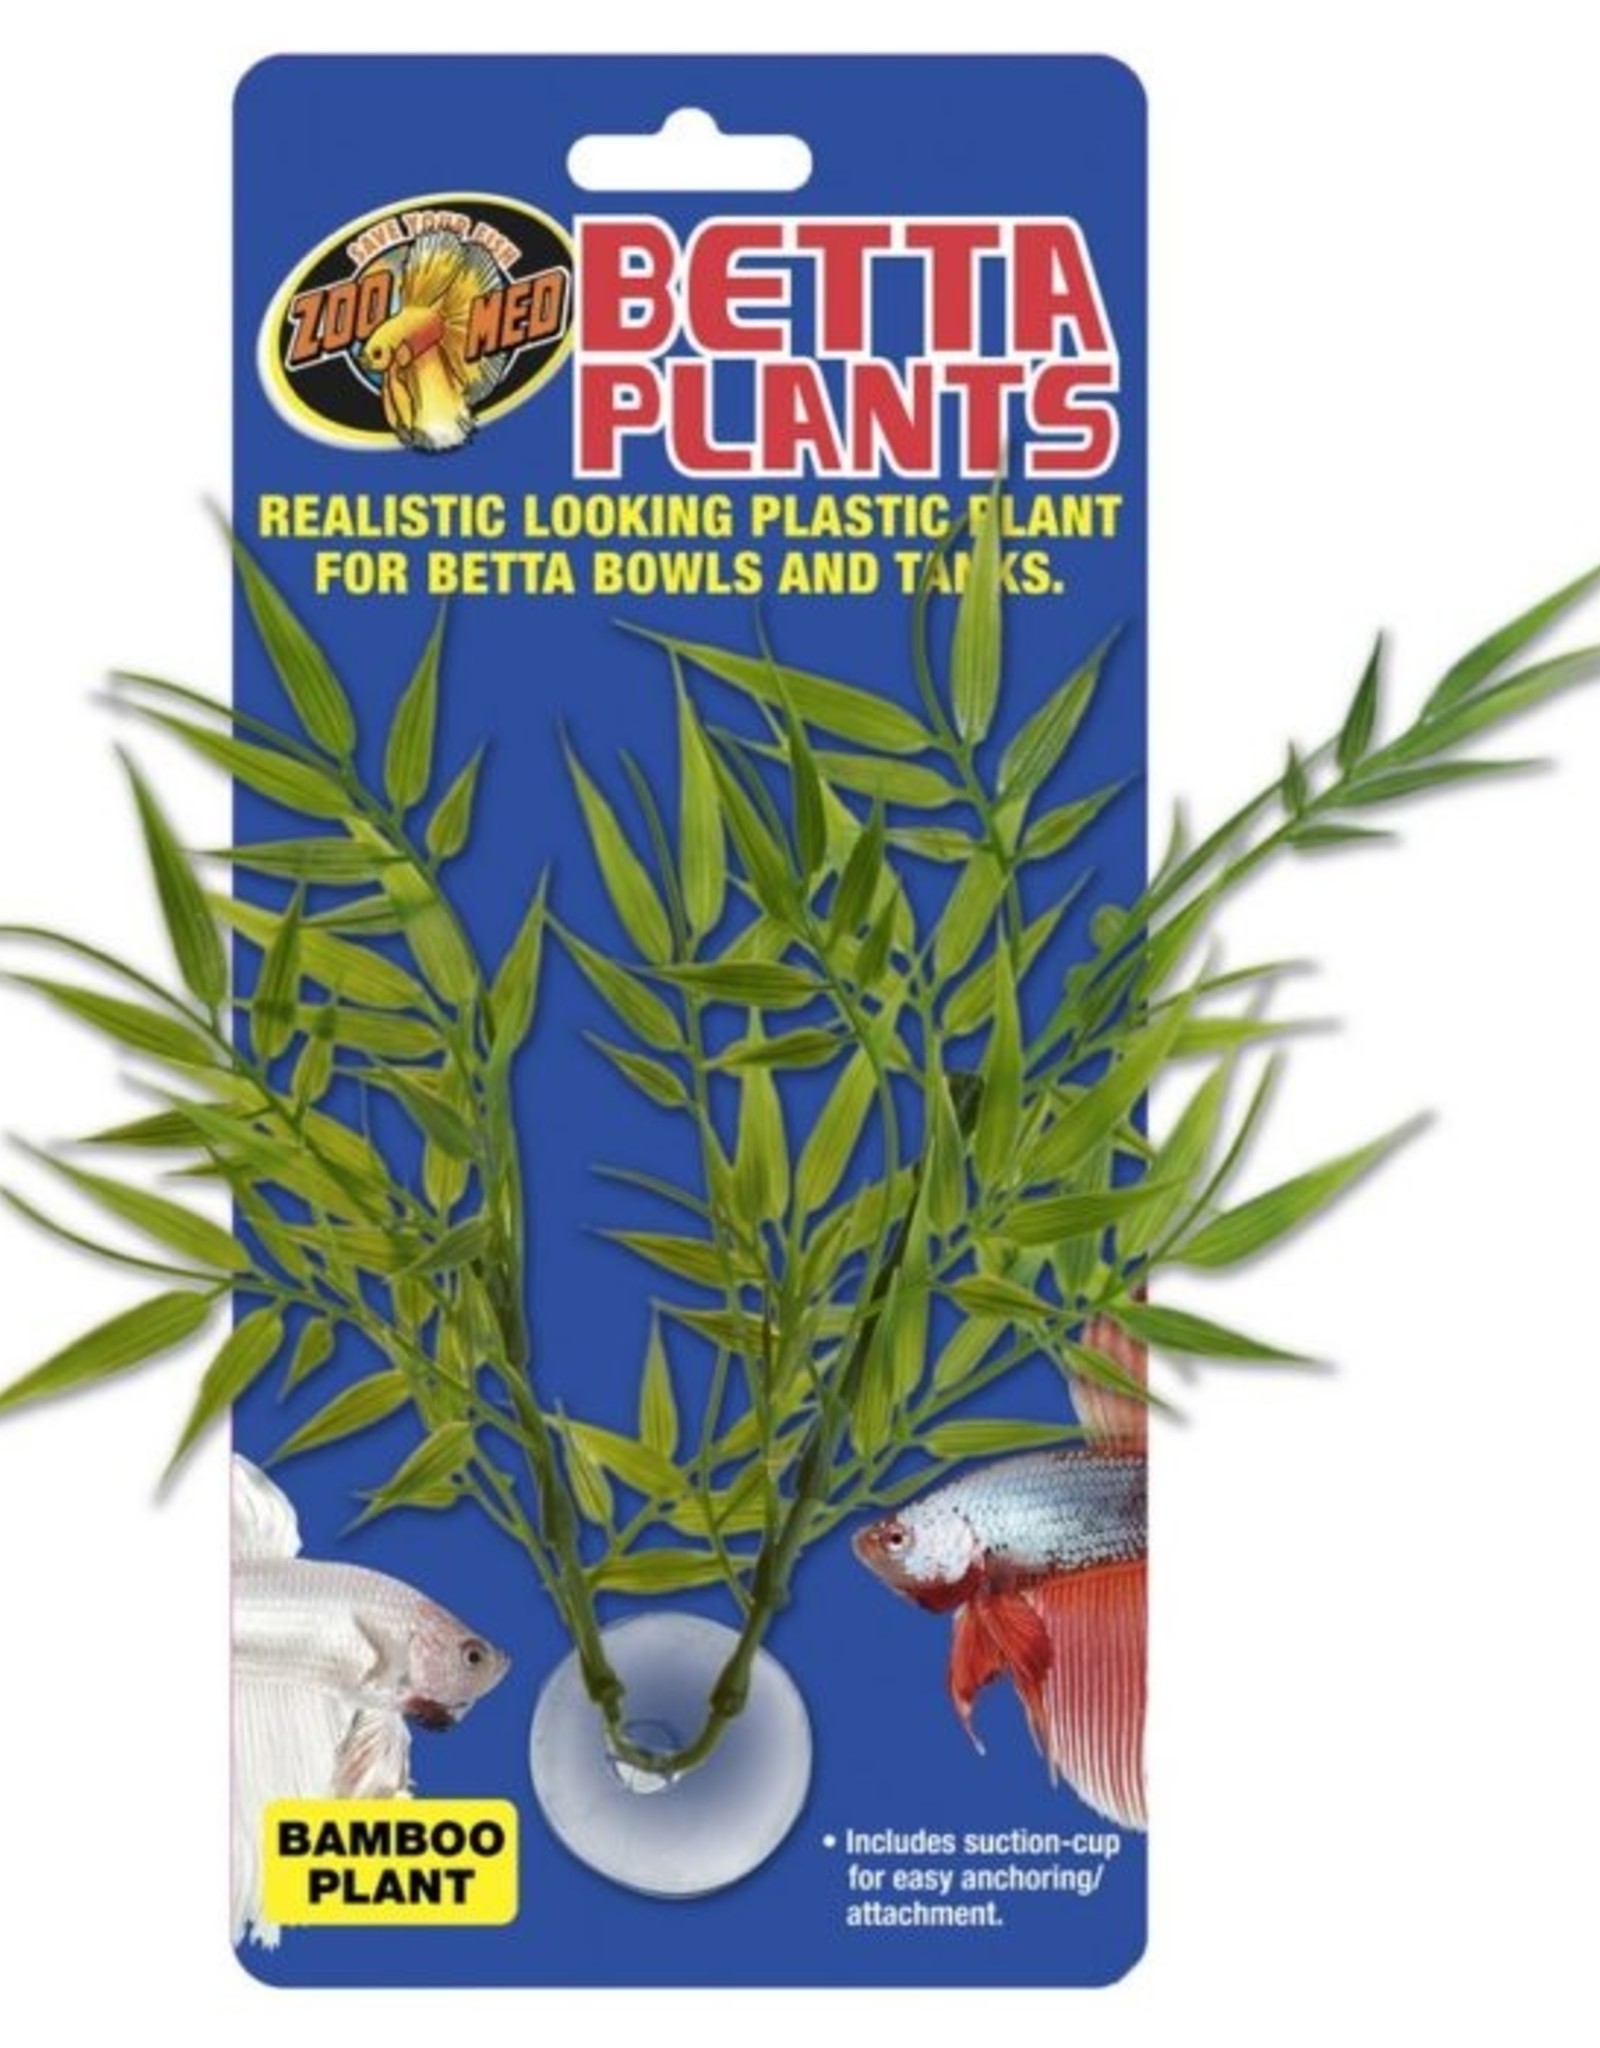 ZOO MED LABS INC ZOO MED BETTA PLANT BAMBOO